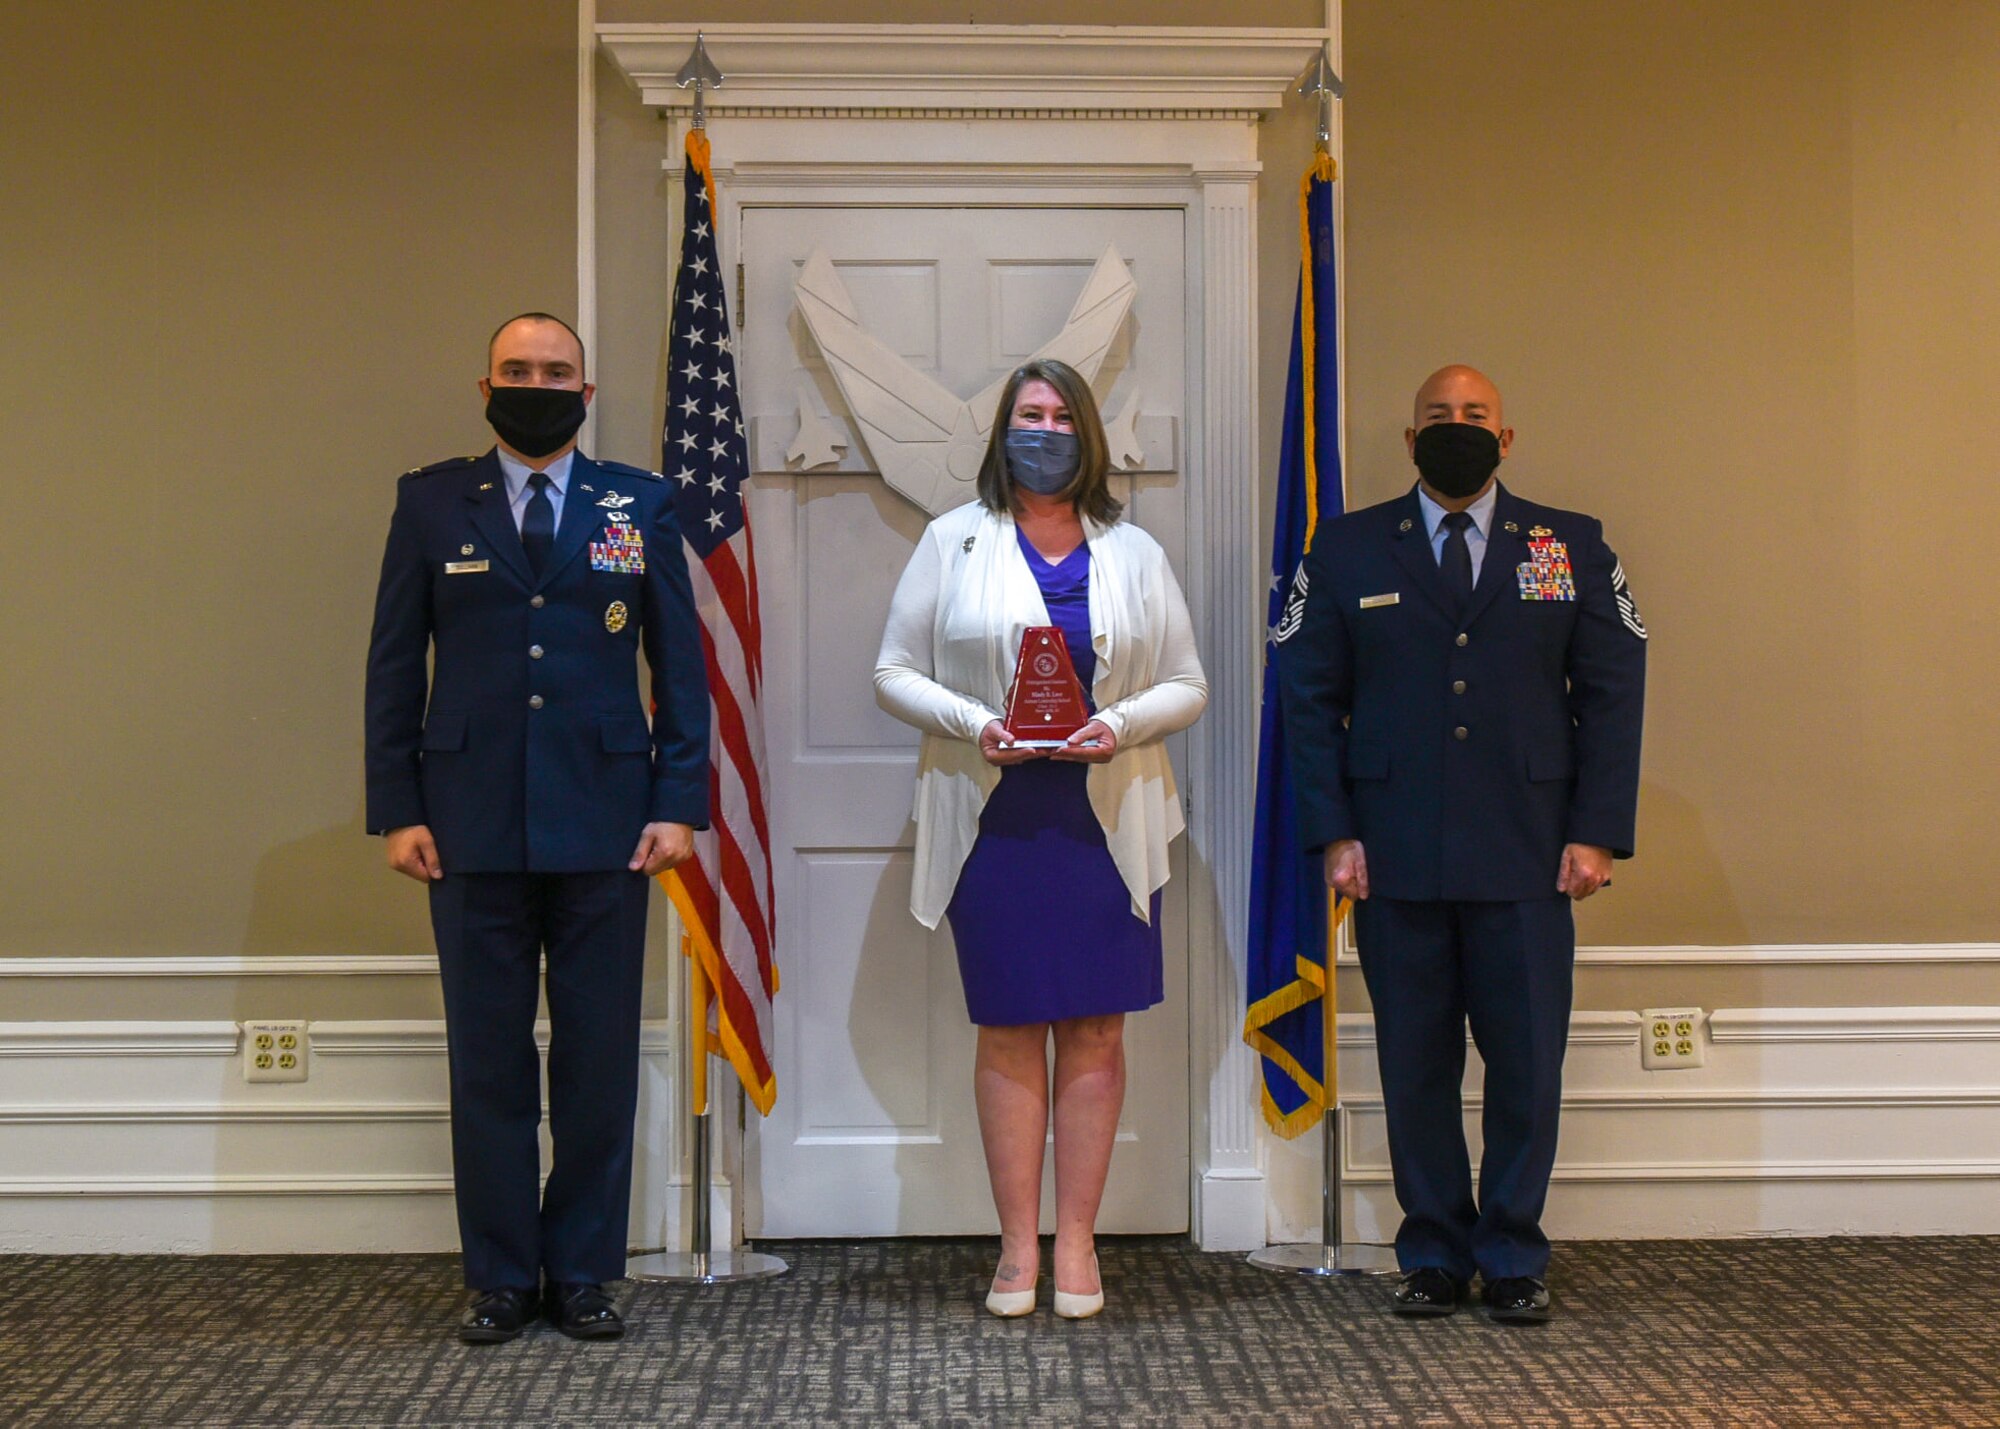 A photo of two military members and a civilian with an award.